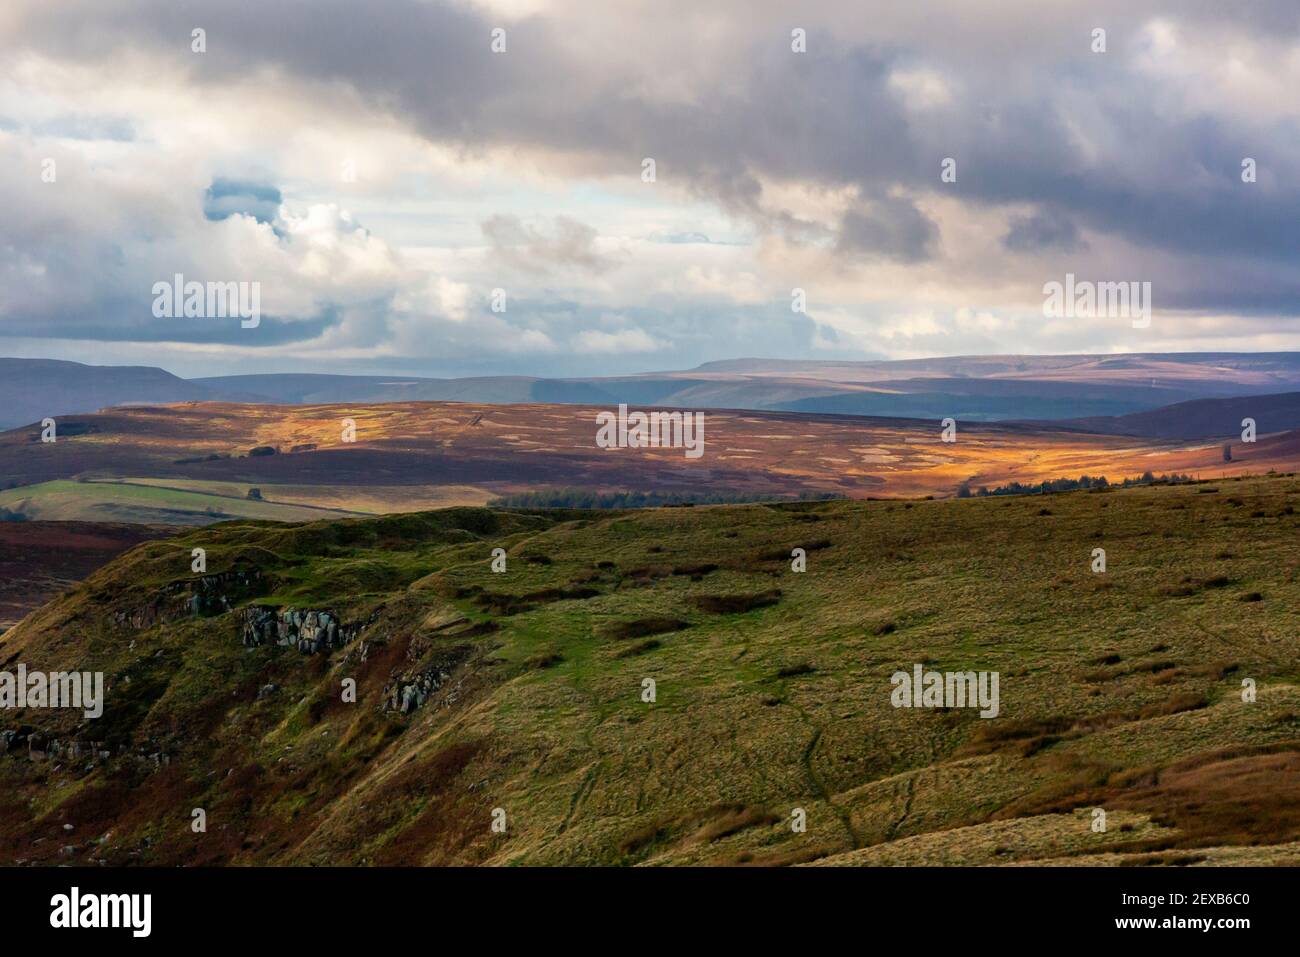 View looking down on the Peak District National Park from Hathersage Moor Derbyshire England UK with stormy sky above. Stock Photo